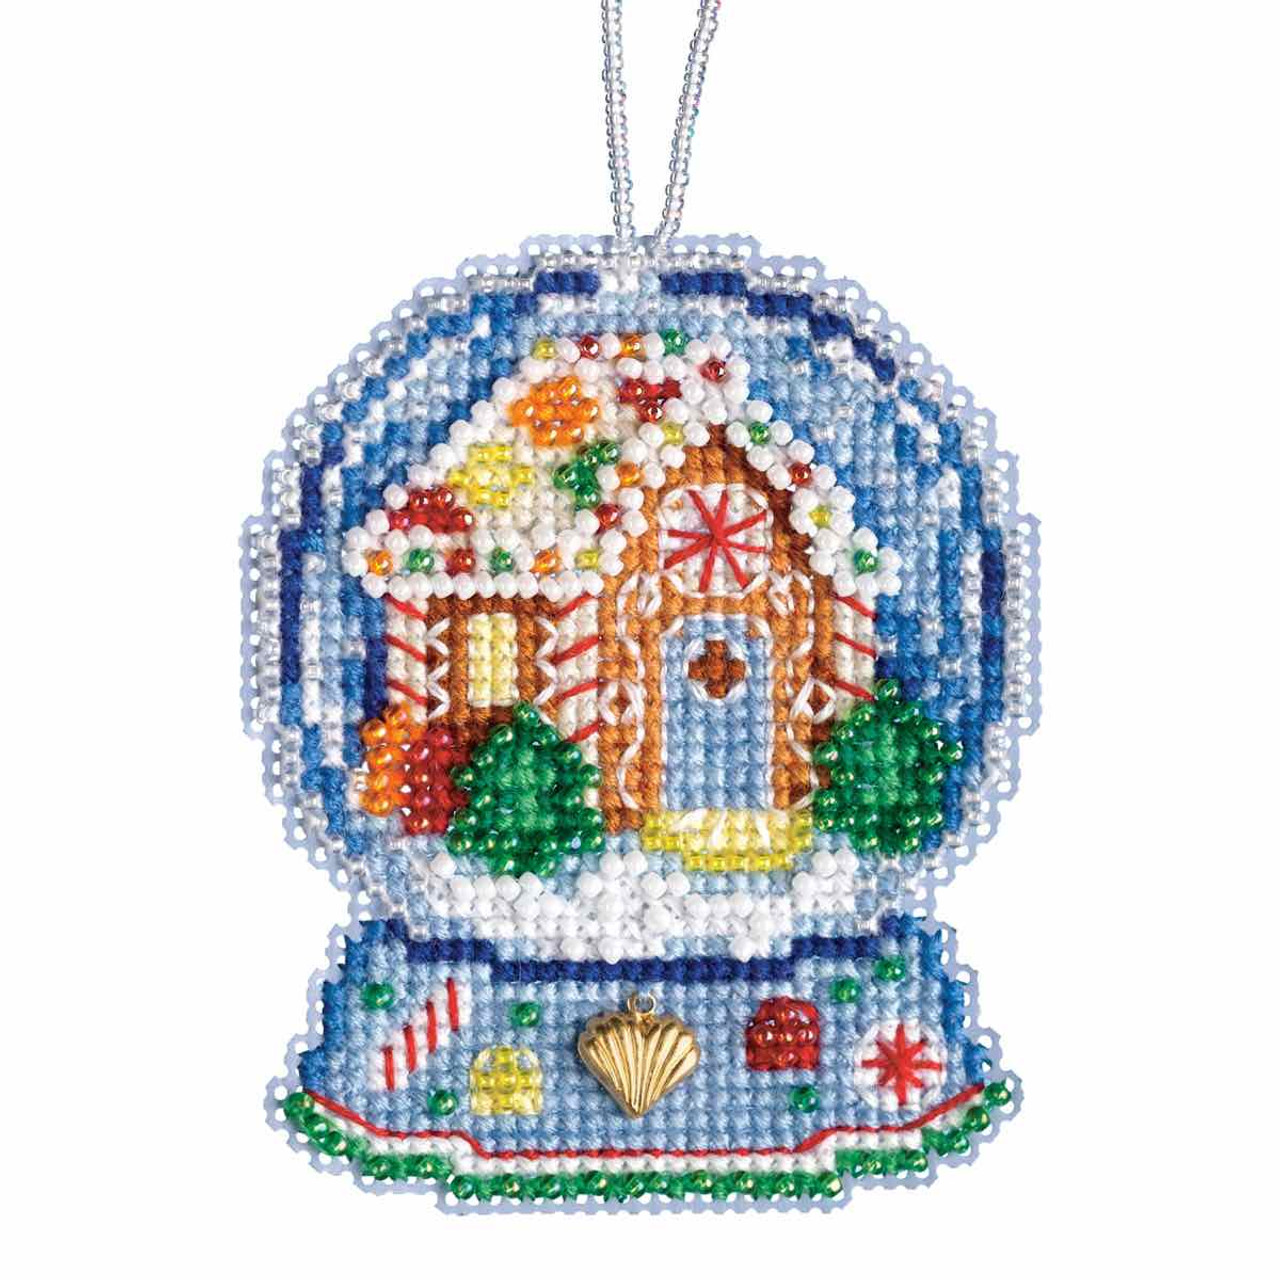 Gingerbread House Snow Globe Beaded Counted Cross Stitch Kit Mill Hill 2019  Ornament MH161932